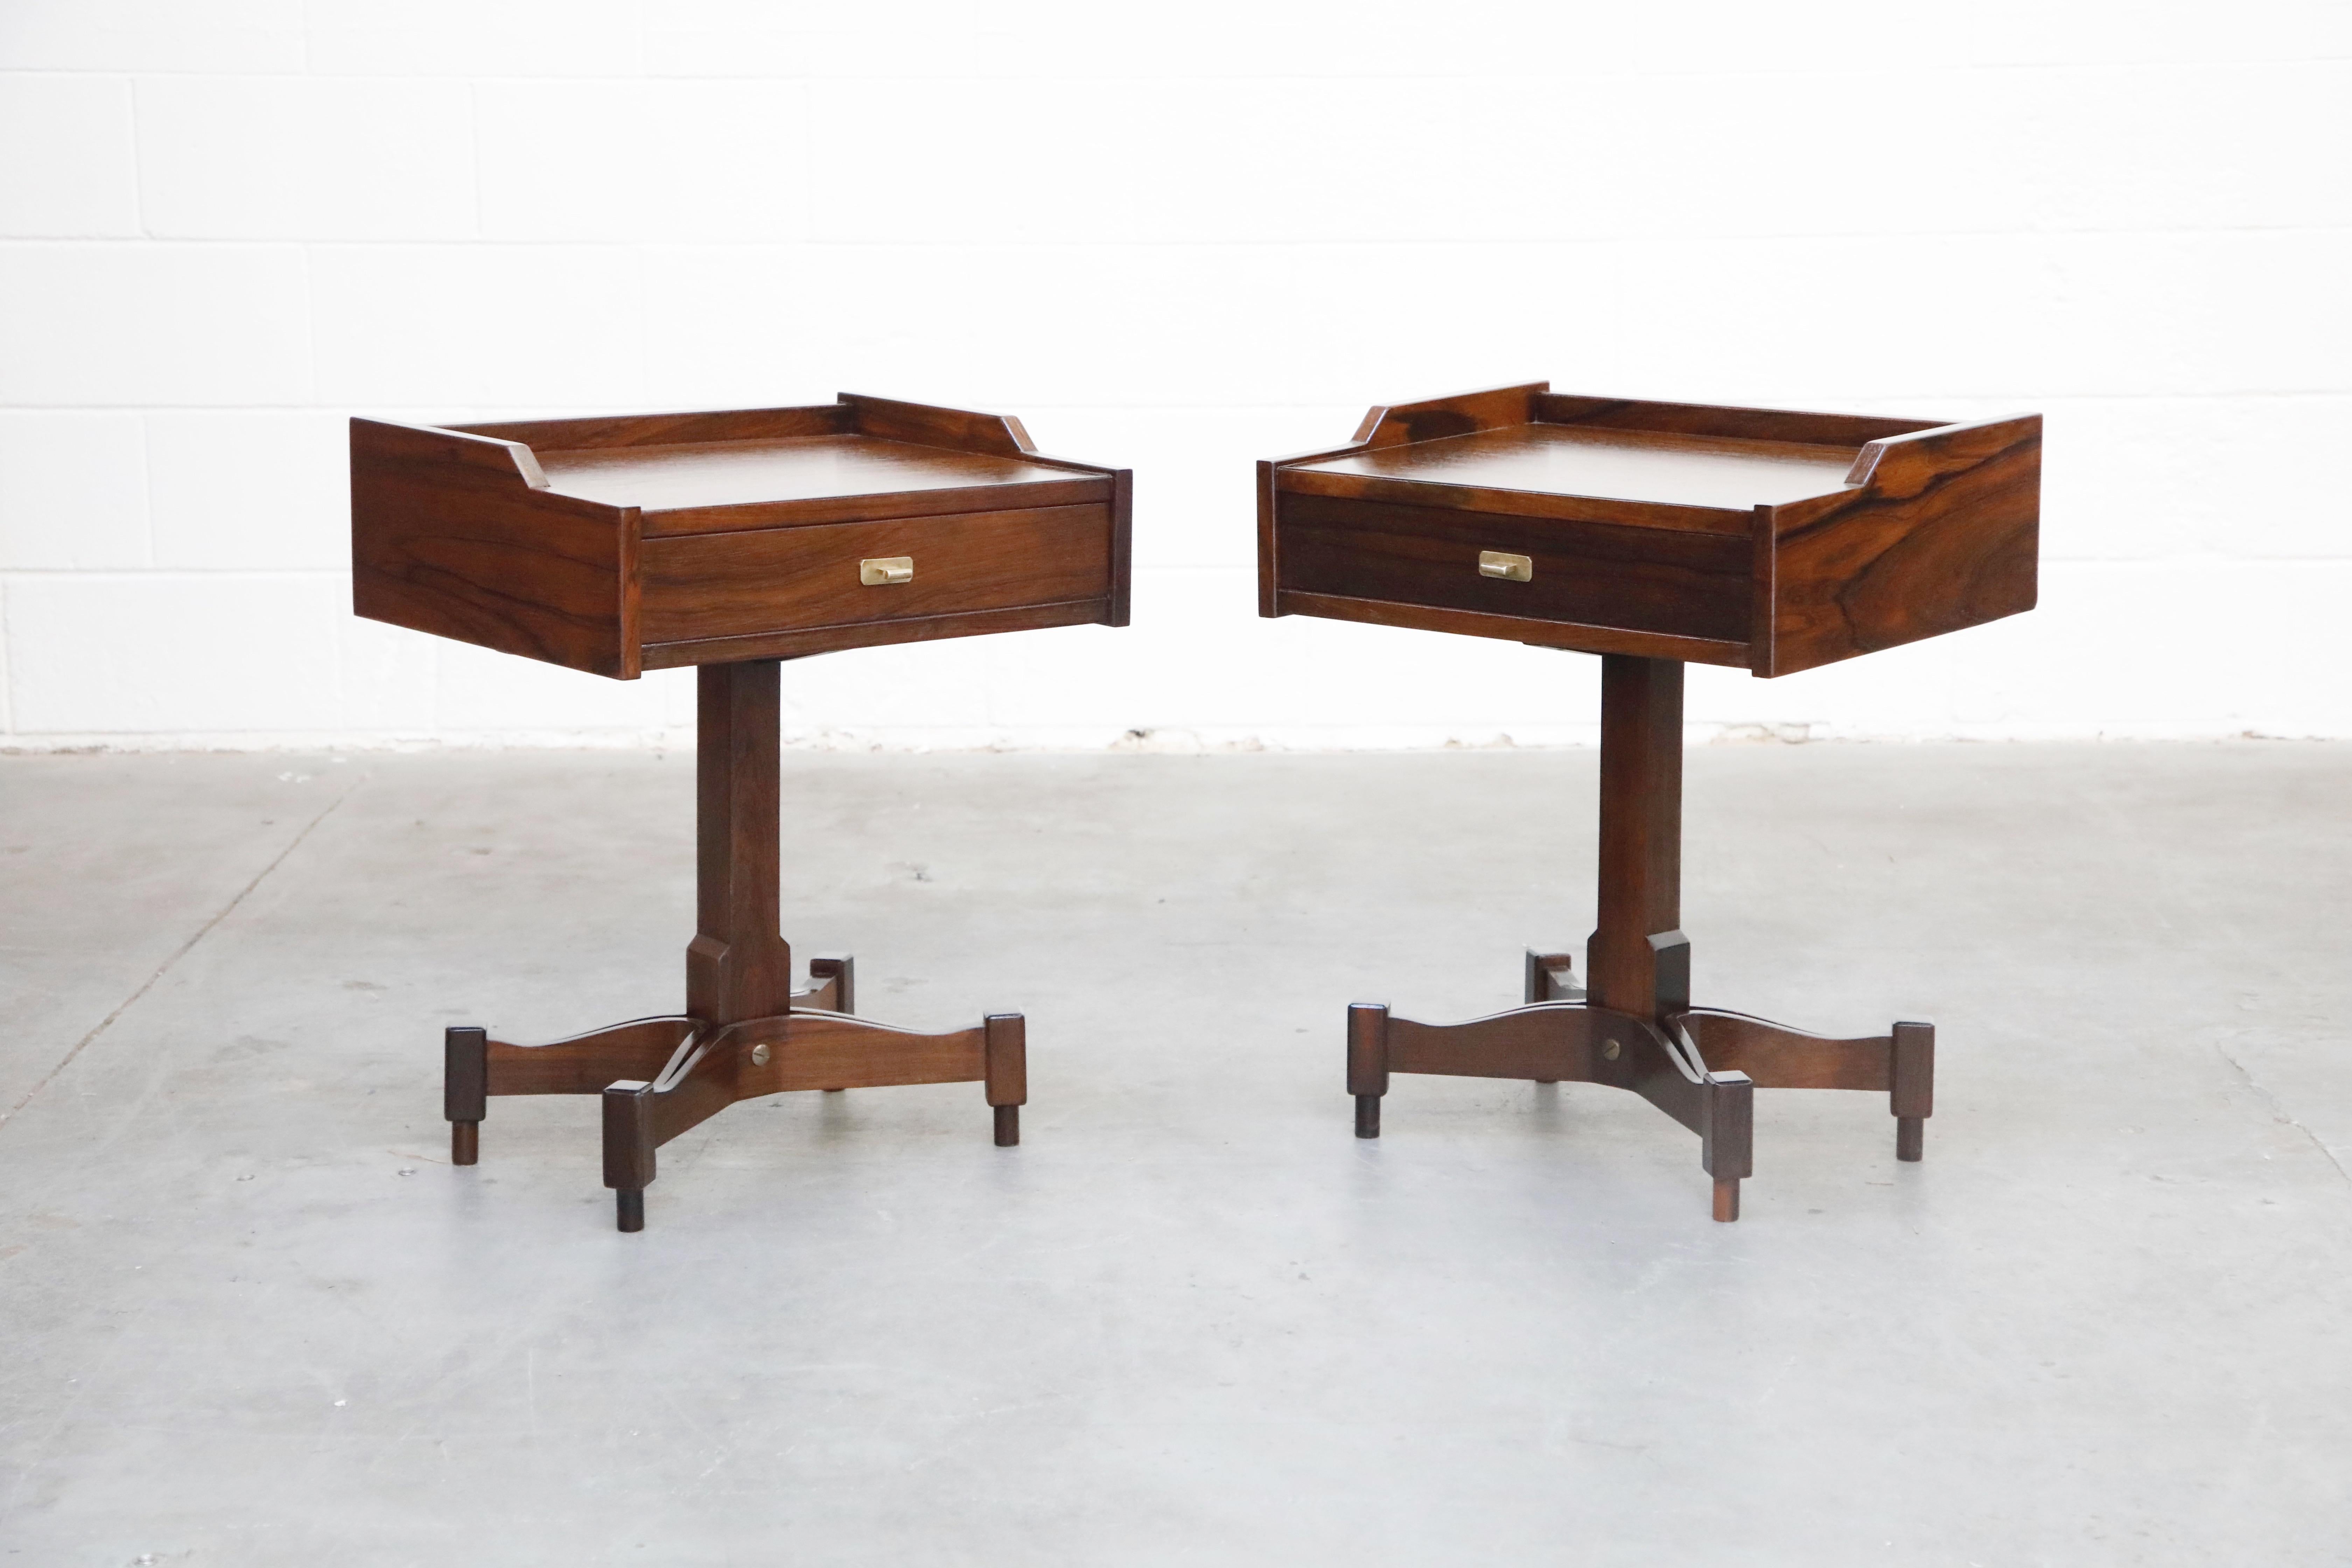 This rare pair of model SC-50 nightstands by Italian designer Claudio Salocchi for Sormani was designed and produced in the 1960s in Italy in small numbers. Featuring incredible veined Rosewood, brass pulls and feet, single drawer on each nightstand